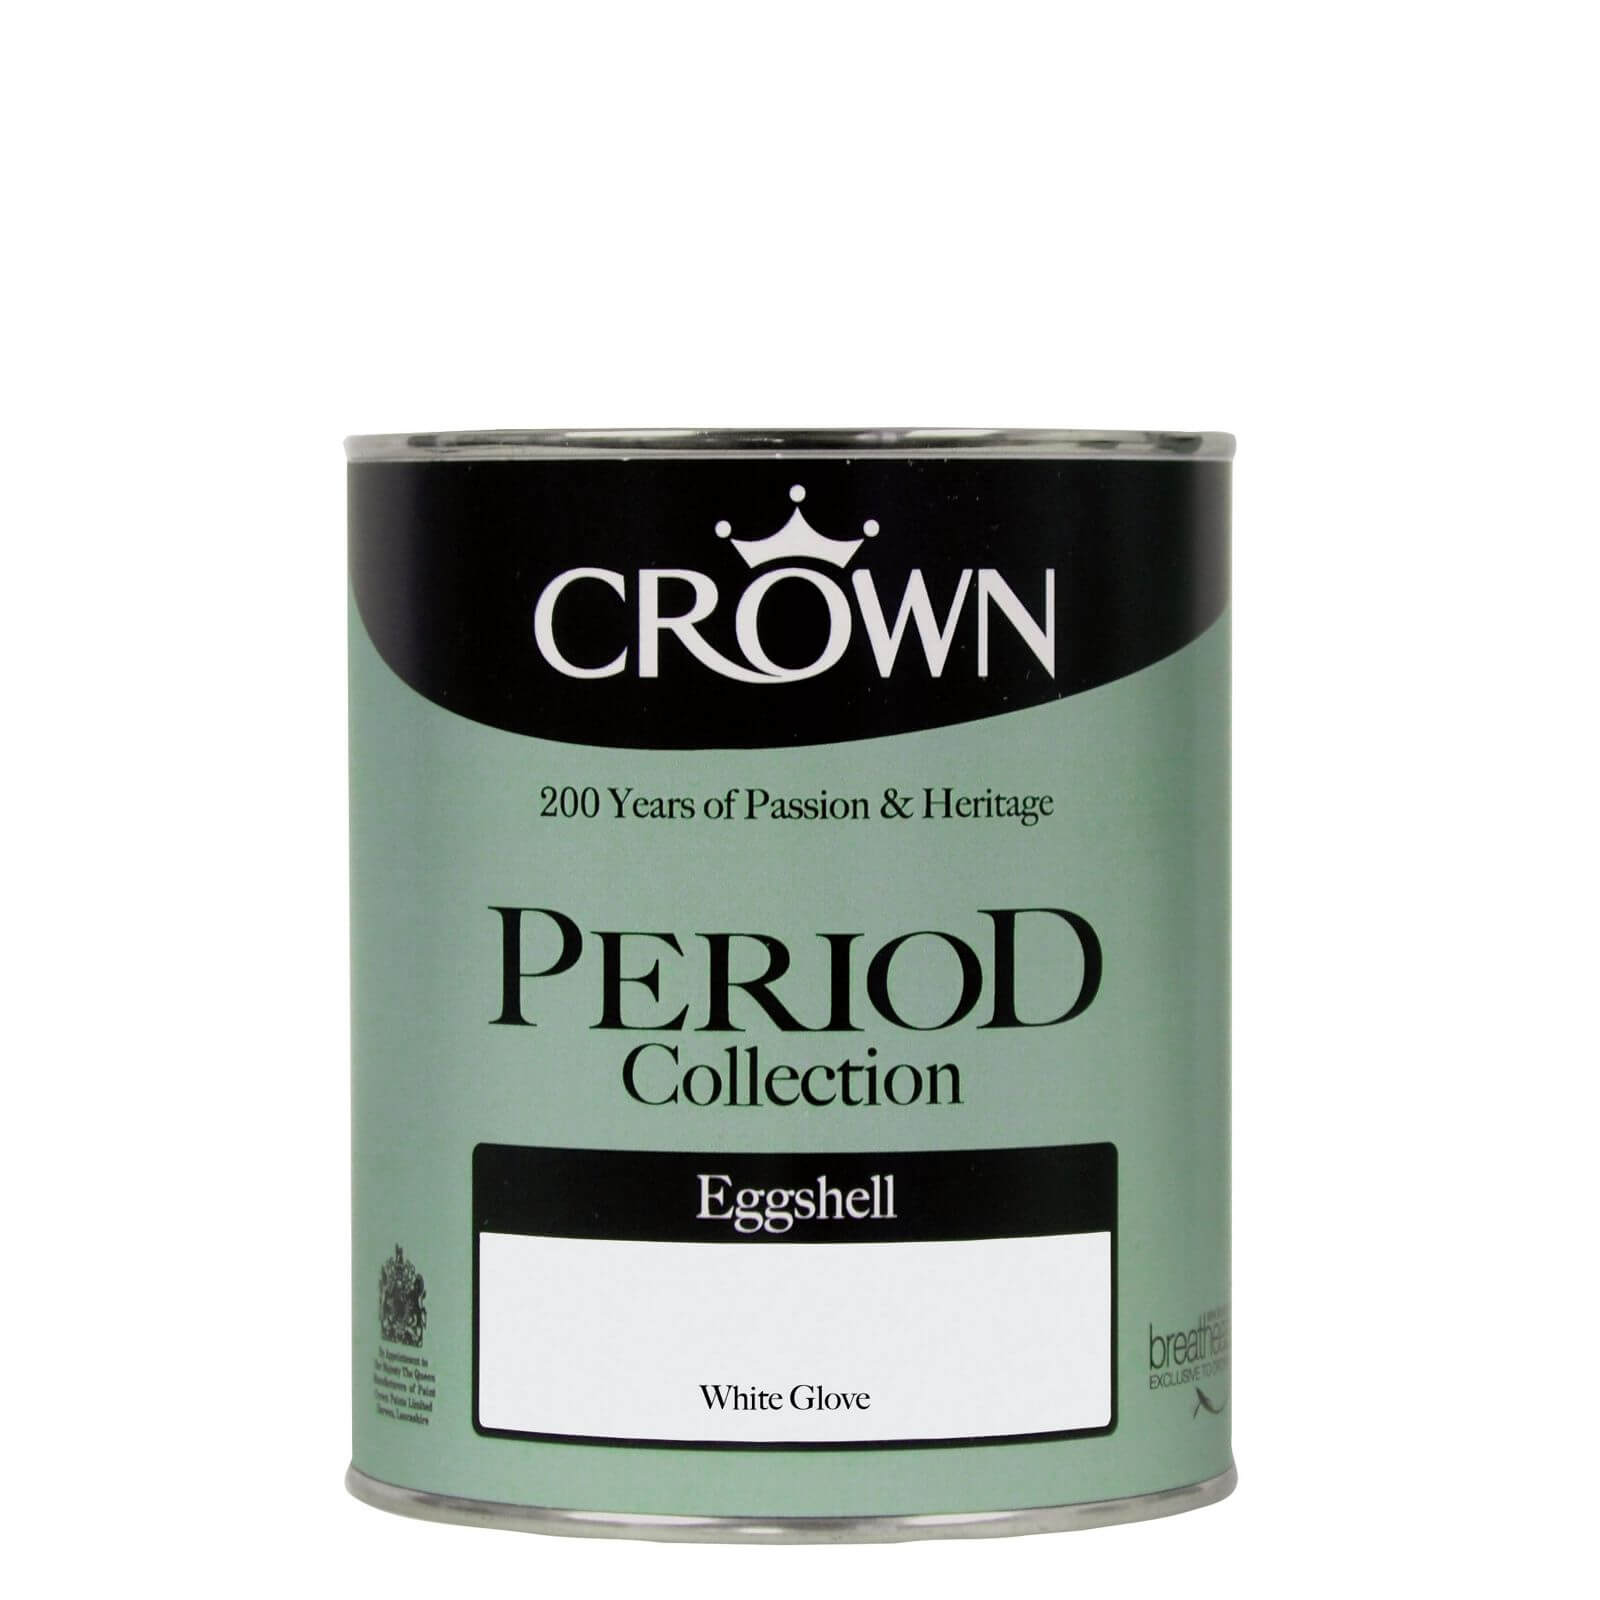 Crown Period Collection White Glove - Eggshell Paint - 750ml